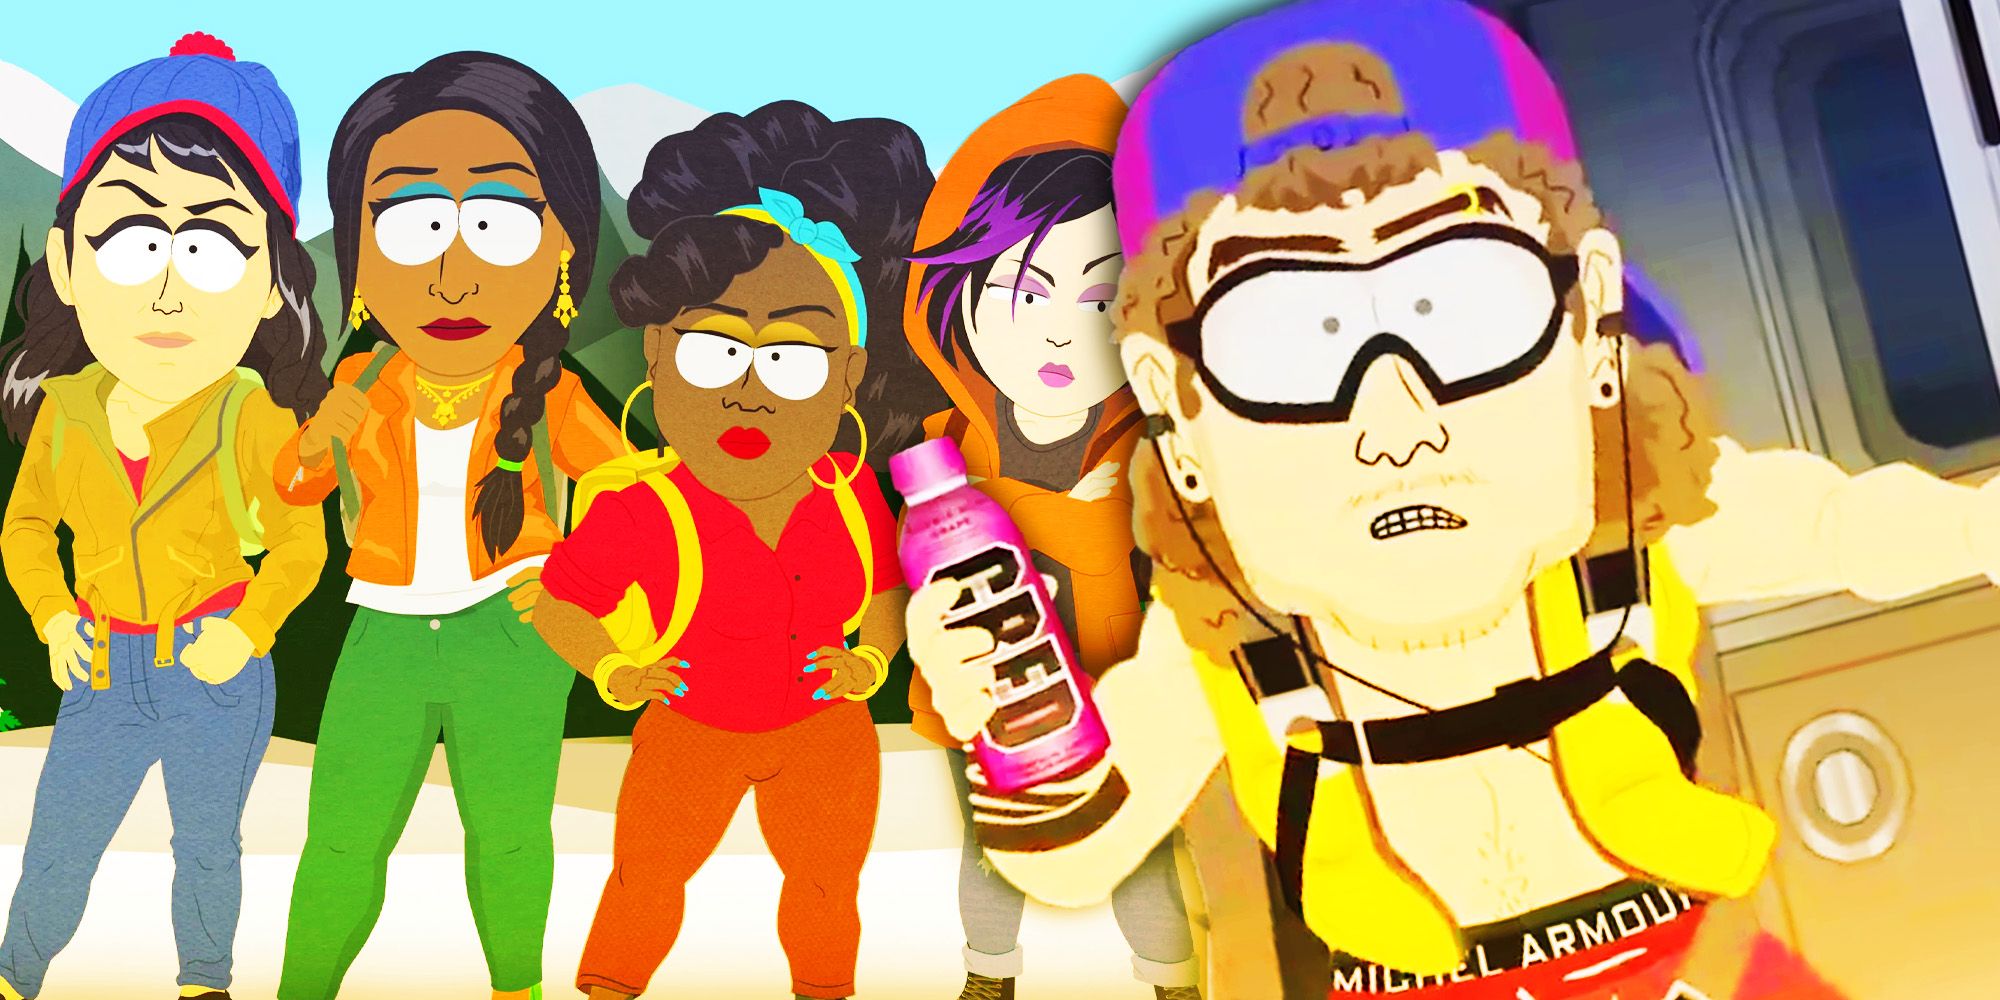 The cast of South Park (Not Suitable for Children) with a bottle of Cred.